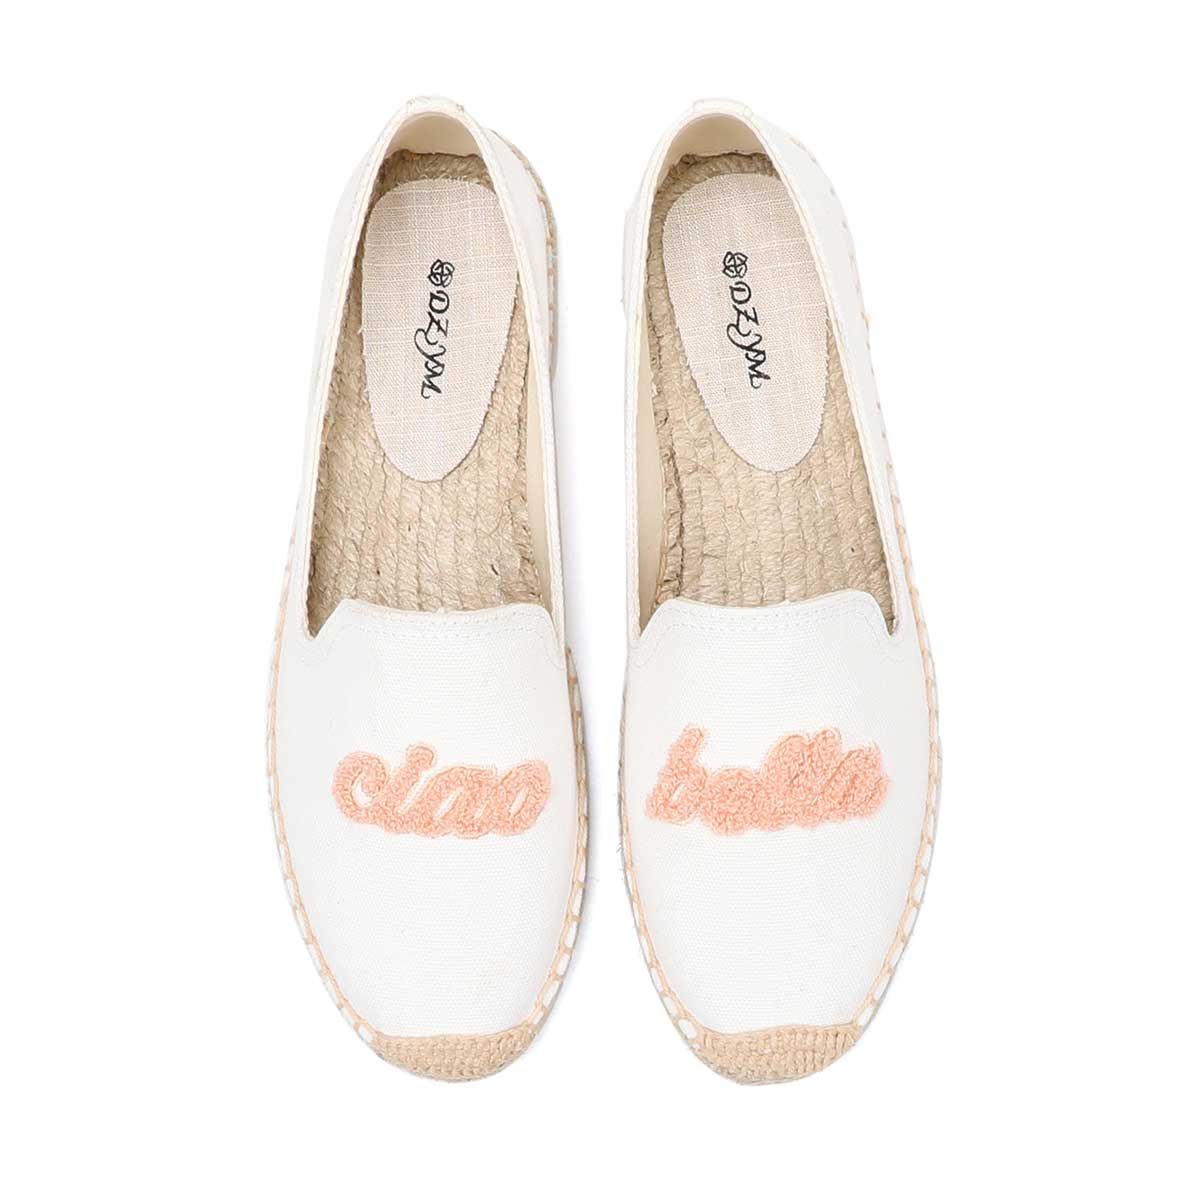 2022 Ladies Casual Letter Embroidered Flat Shoes Summer Slip-On Cloth Shoes Espadrilles All-match Comfortable Loafers Fisherman